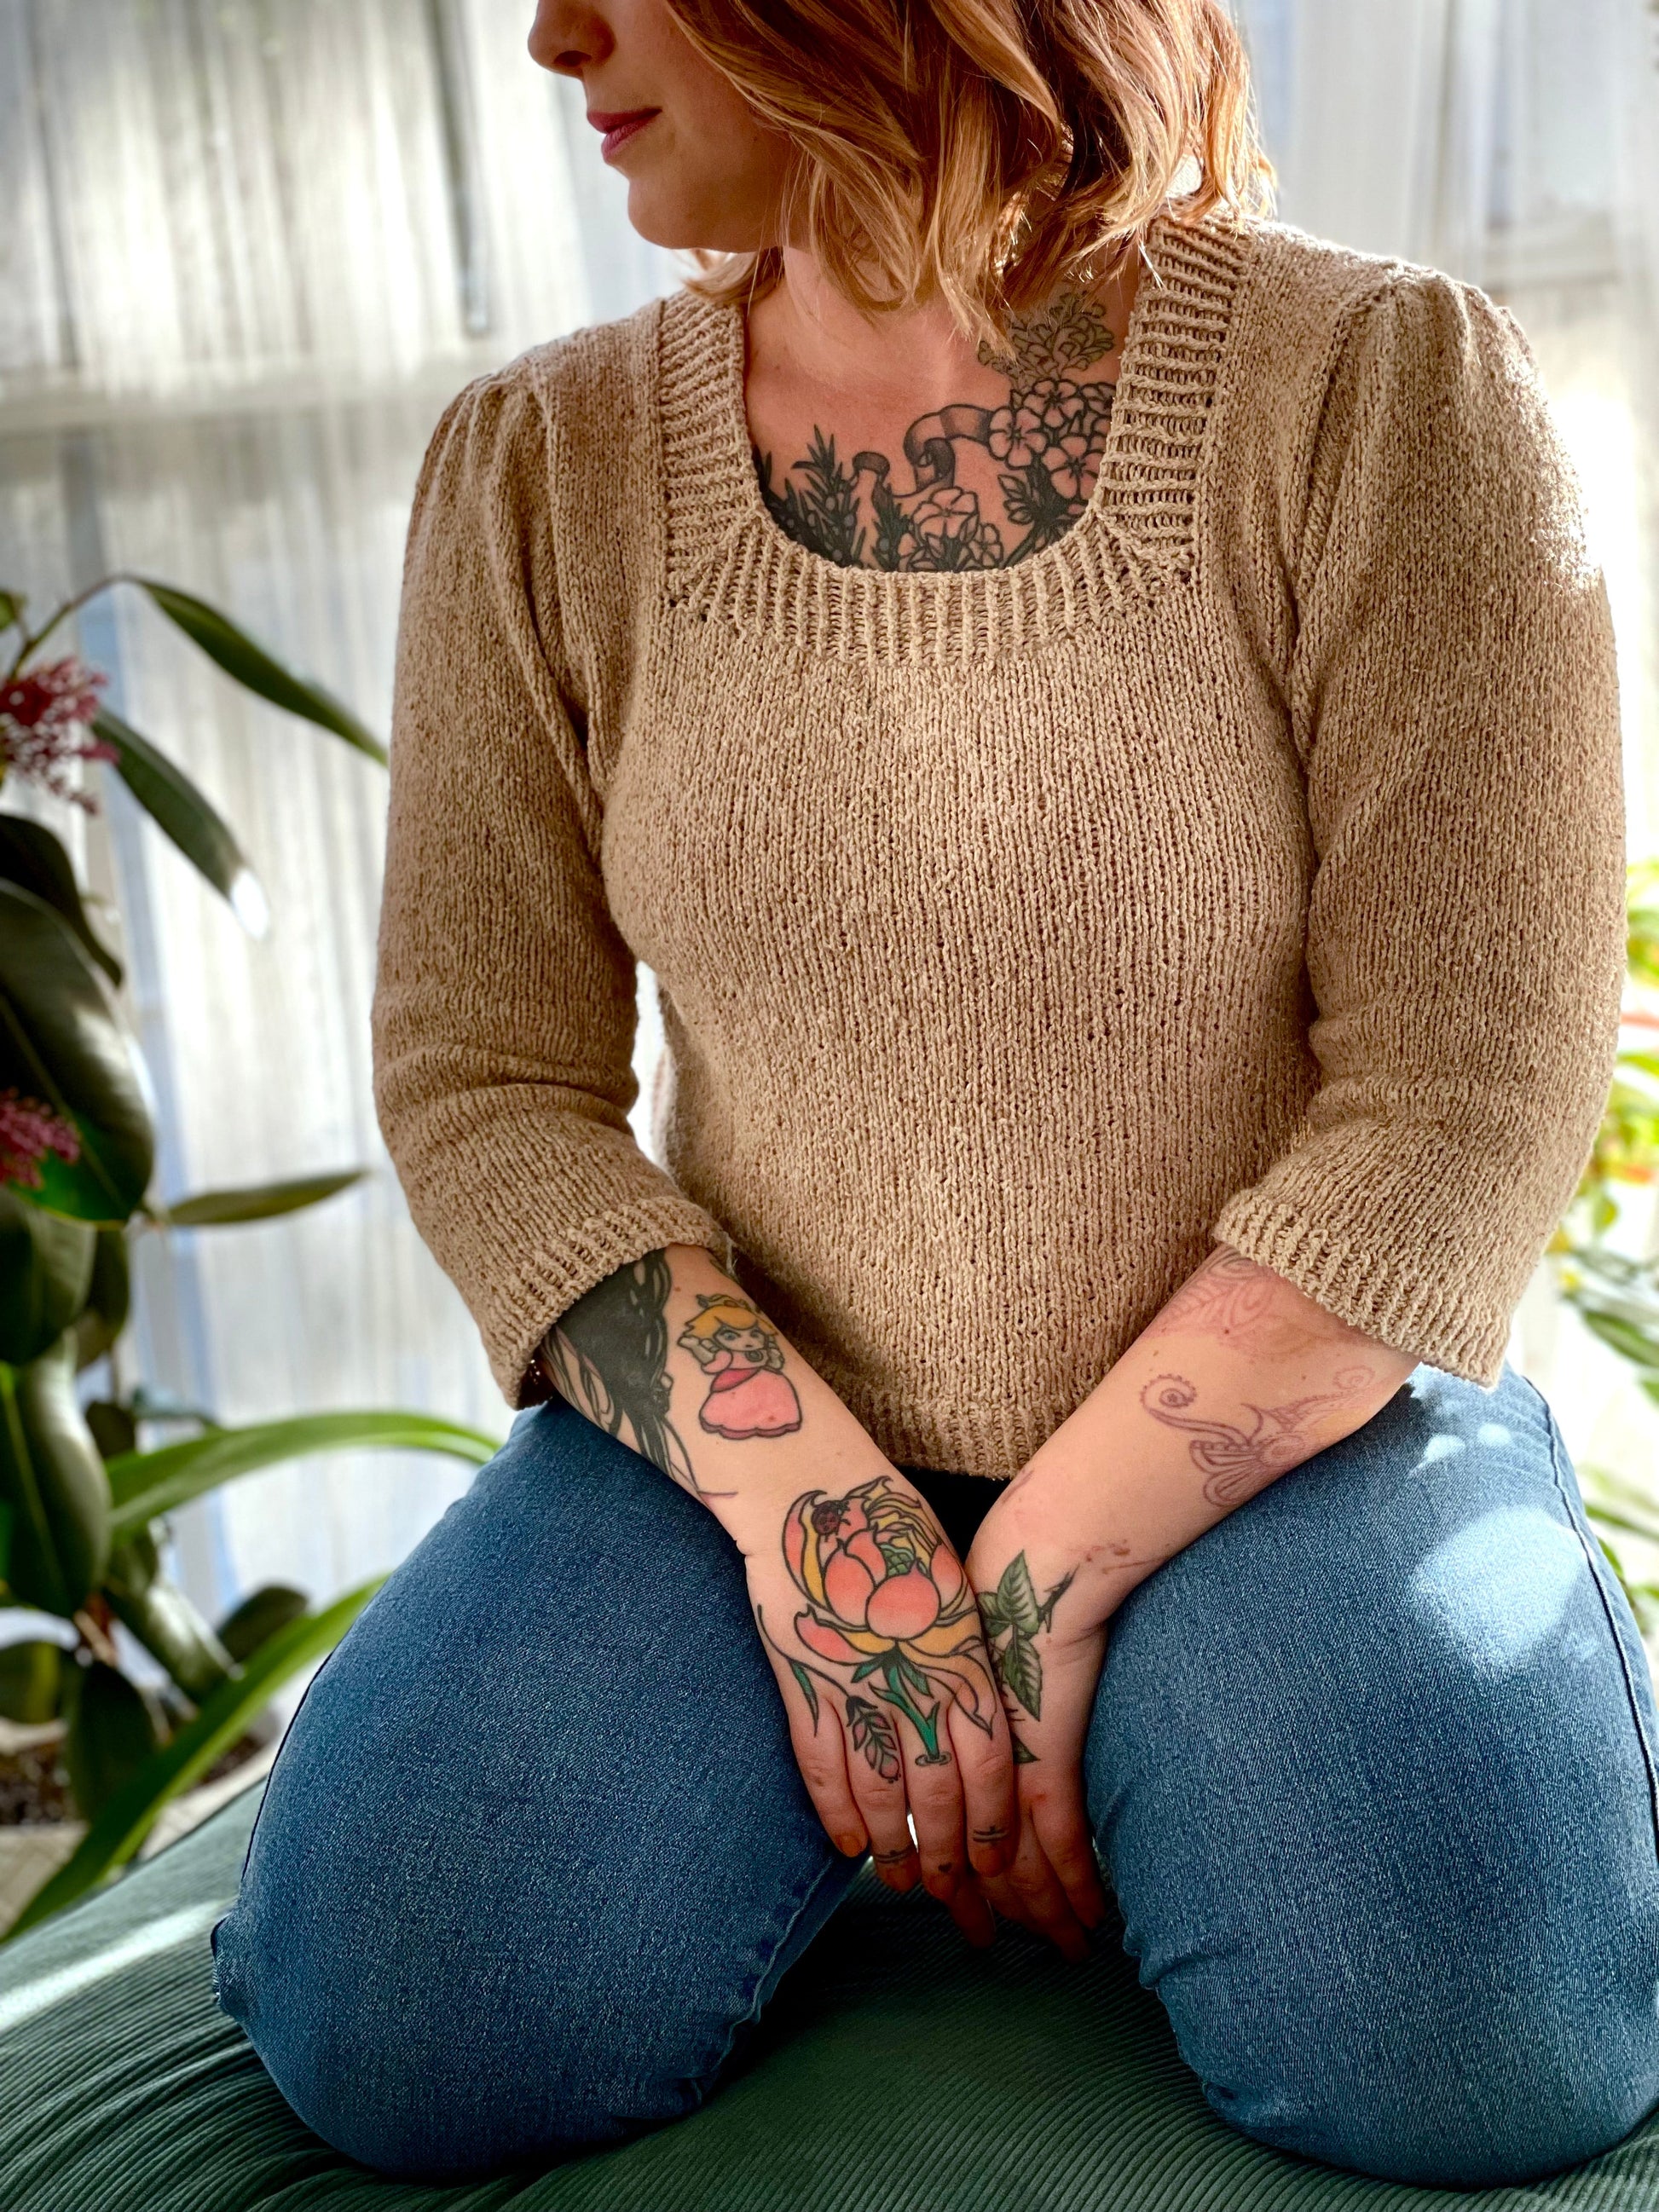 Bess kneels on a footstool, wearing a light beige sweater and blue jeans. The sweater is knit with a square neckline and 3/4 sleeves, with have been gathered at the top to create pleats.